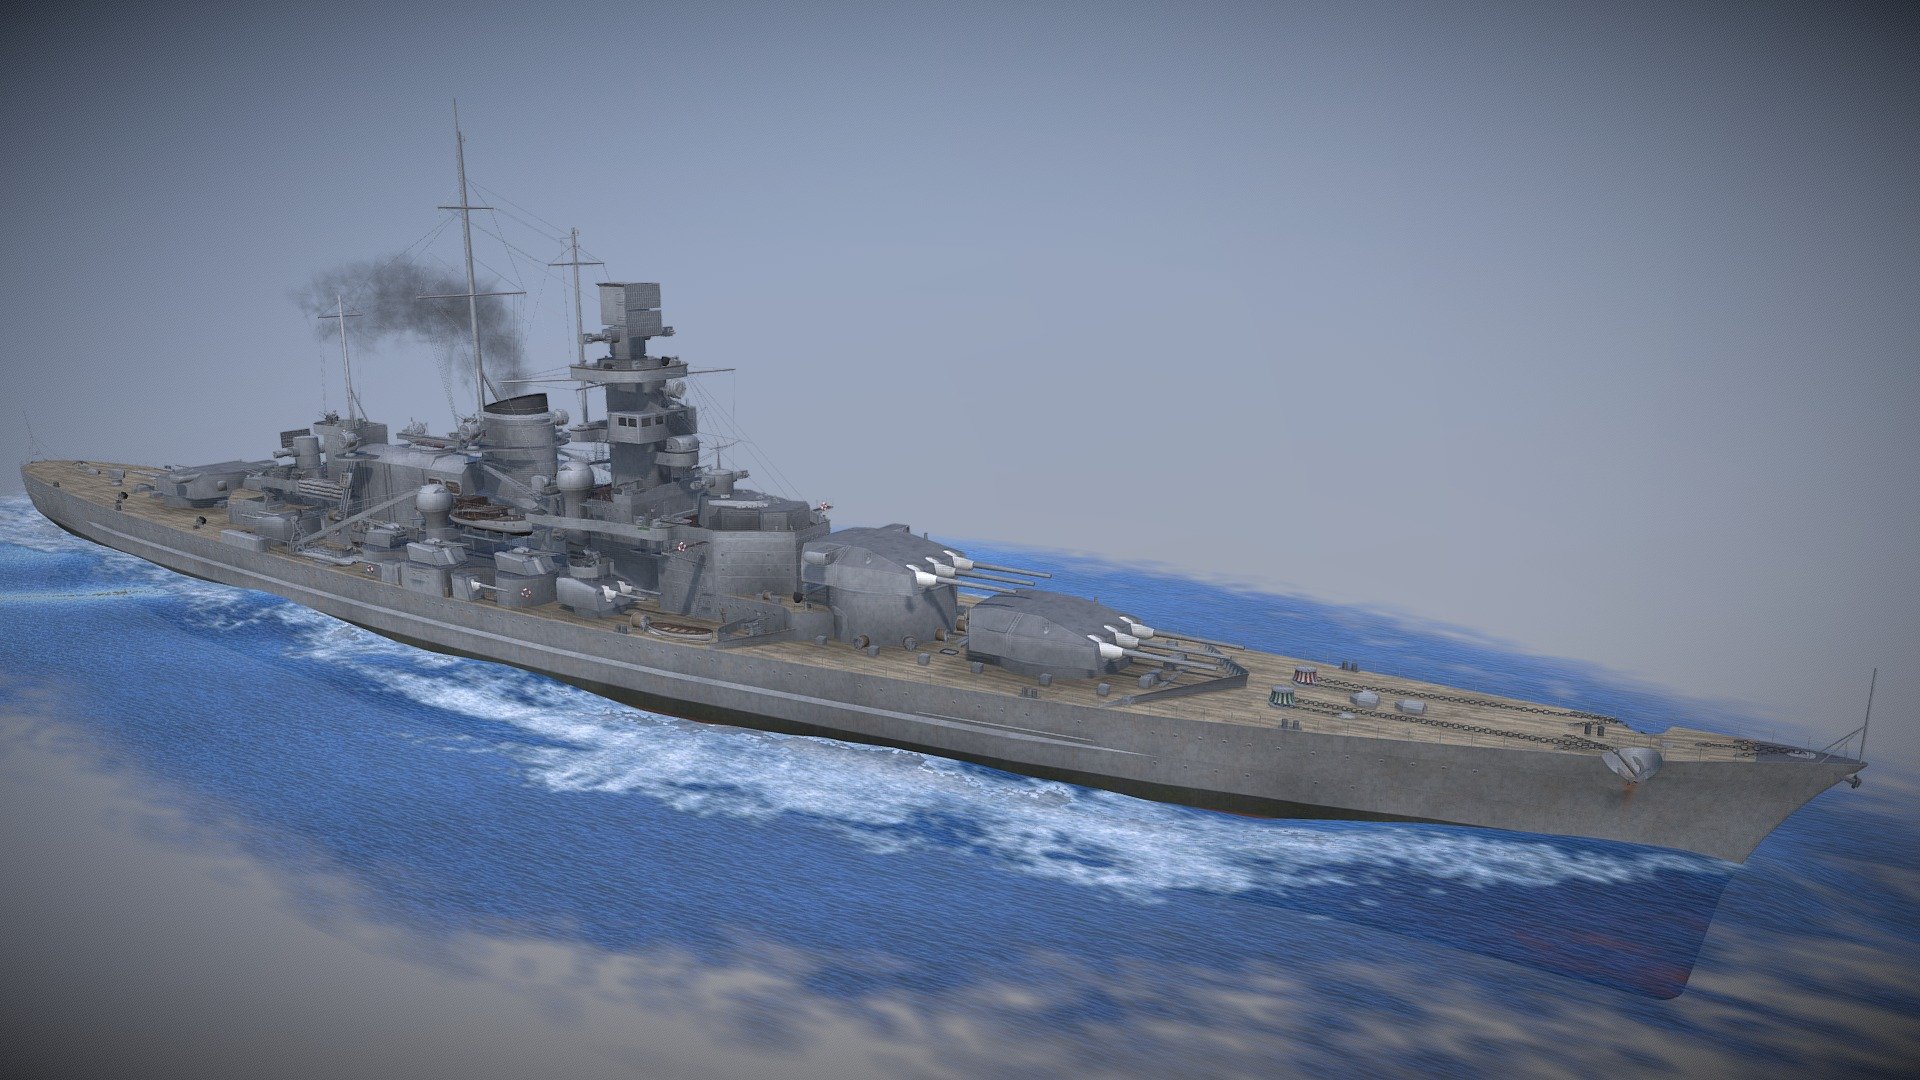 The KMS Gneisenau was a Scharnhorst-class battleship of the german navy during World War 2. Gneisenau and Scharnhorst were most know for there sorties together into the Atlantic to raid British merchant shipping.

(reuploaded on 11/23/2021 with remodelled hull and boats) - Gneisenau - Buy Royalty Free 3D model by ThomasBeerens 3d model